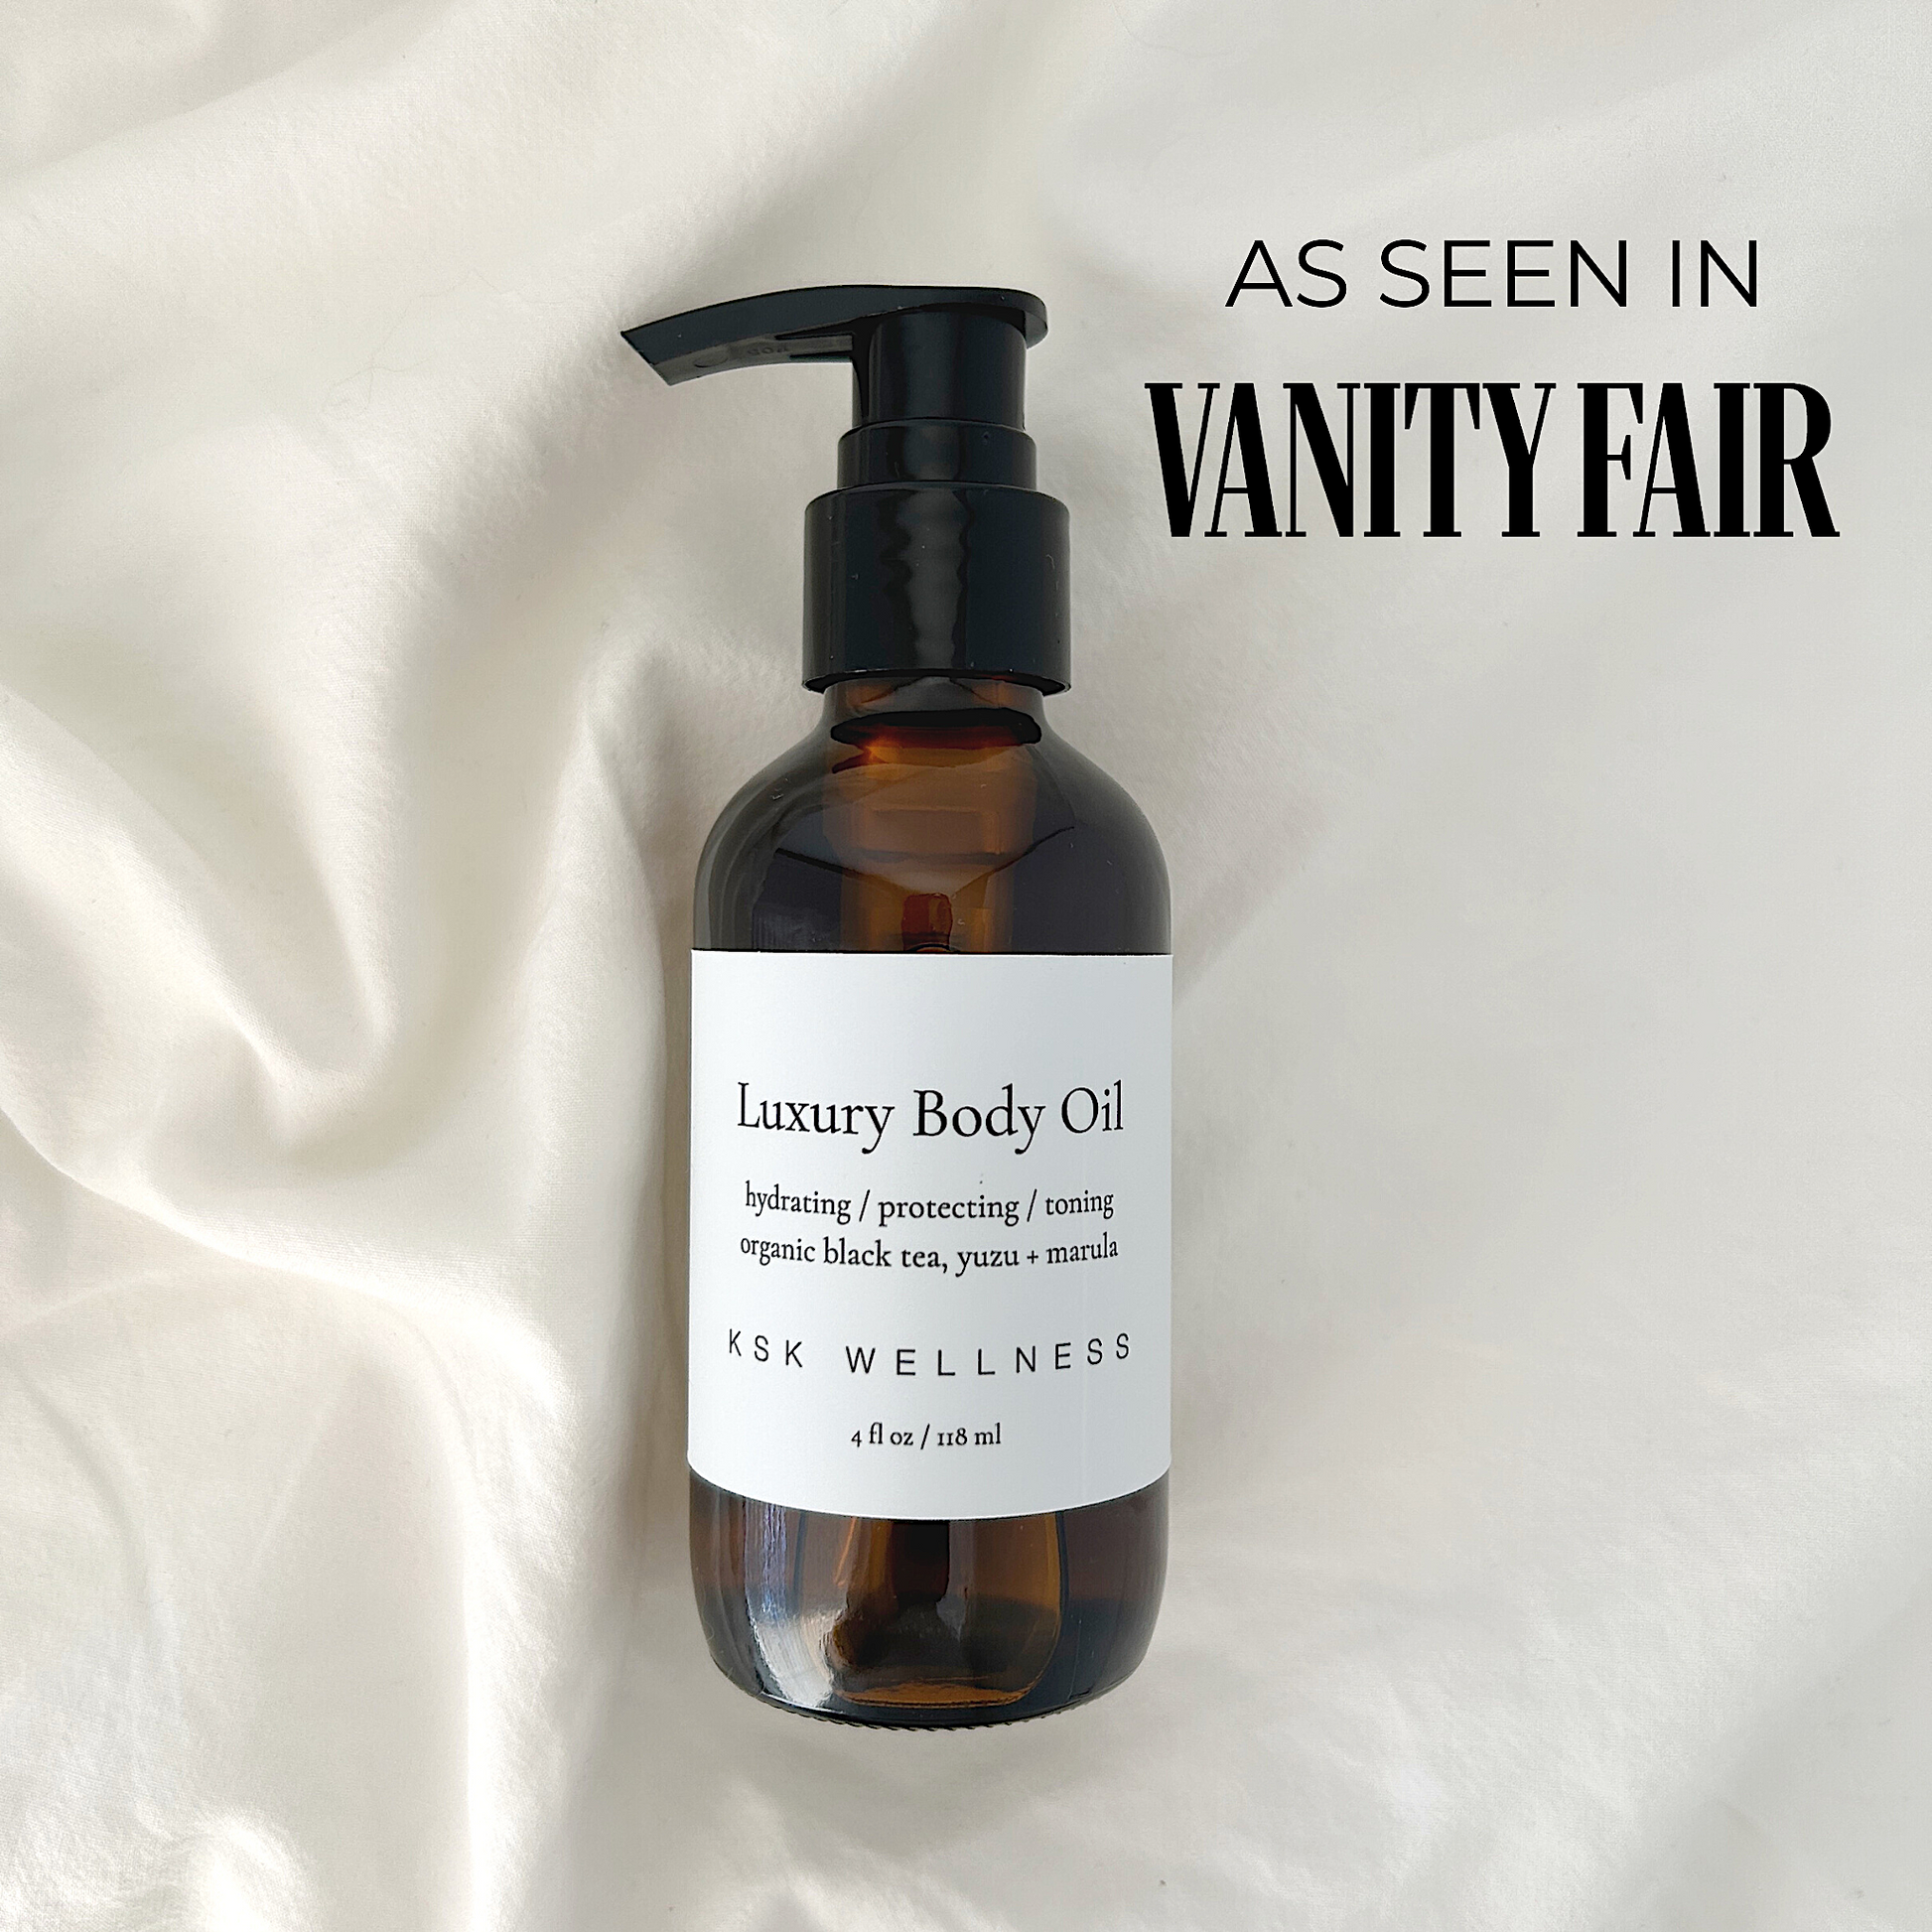 The Luxury Body Oil works to restore dry skin, strengthen skin barrier, and moisturize your body leaving skin velvety soft. It has anti-aging benefits helps to inhibit the breakdown of collagen. It is loaded with vitamins A, B, D + E that help prevent premature aging. It contains lecithin, oleic and linoleic acid that helps to maintain the skin’s natural barrier, supporting its ability to retain moisture due to its high lipid and fatty acid content. Sustainable, clean beauty, vegan and cruelty free.